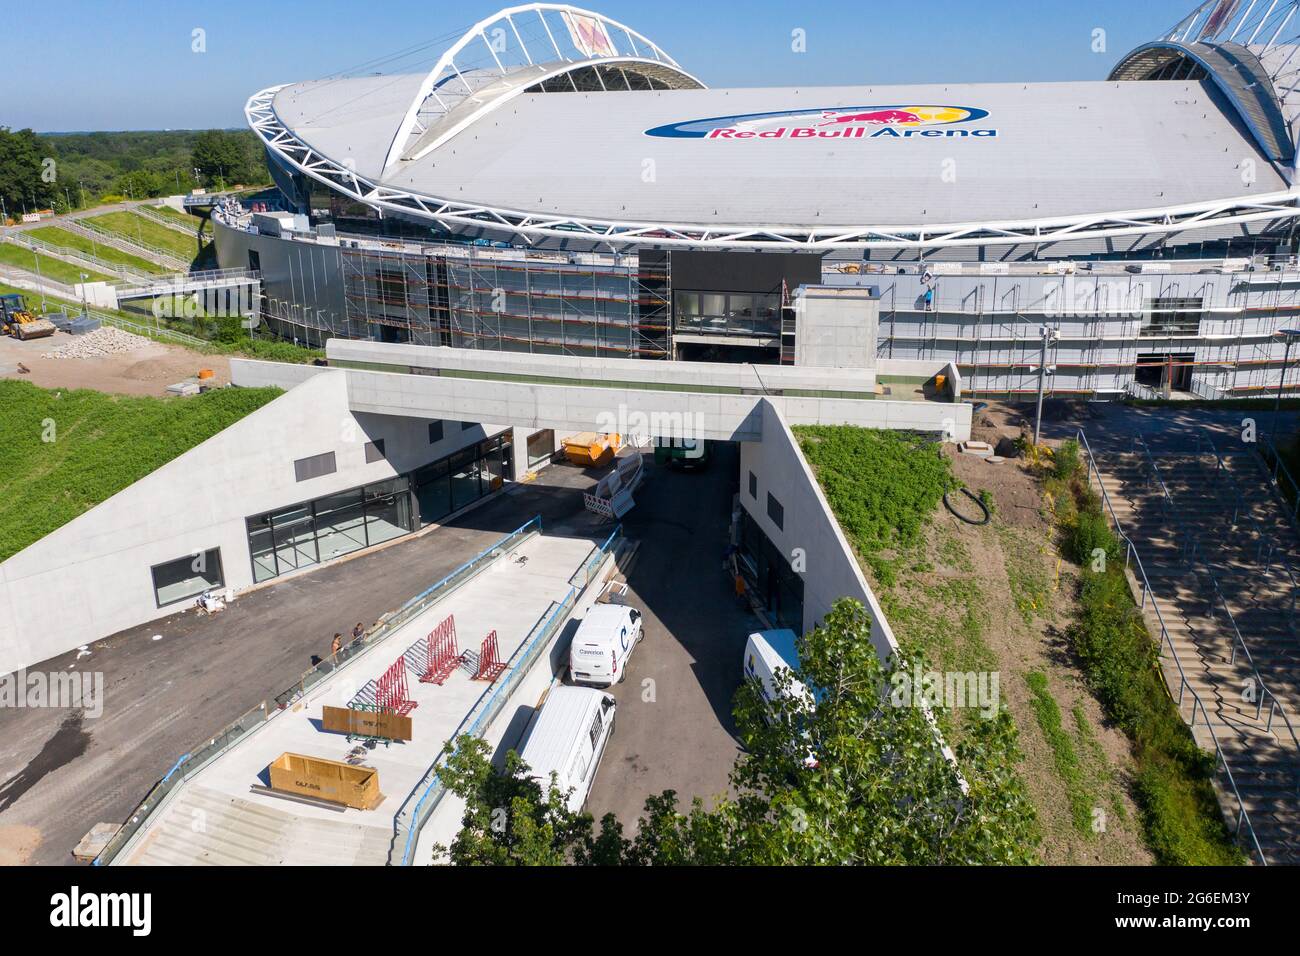 14 June 21 Saxony Leipzig Football Bundesliga Rb Leipzig A New Entrance Leads Through The Dam Into The Red Bull Arena The Home Ground Of The Rasenballers Is Being Rebuilt The Spectator